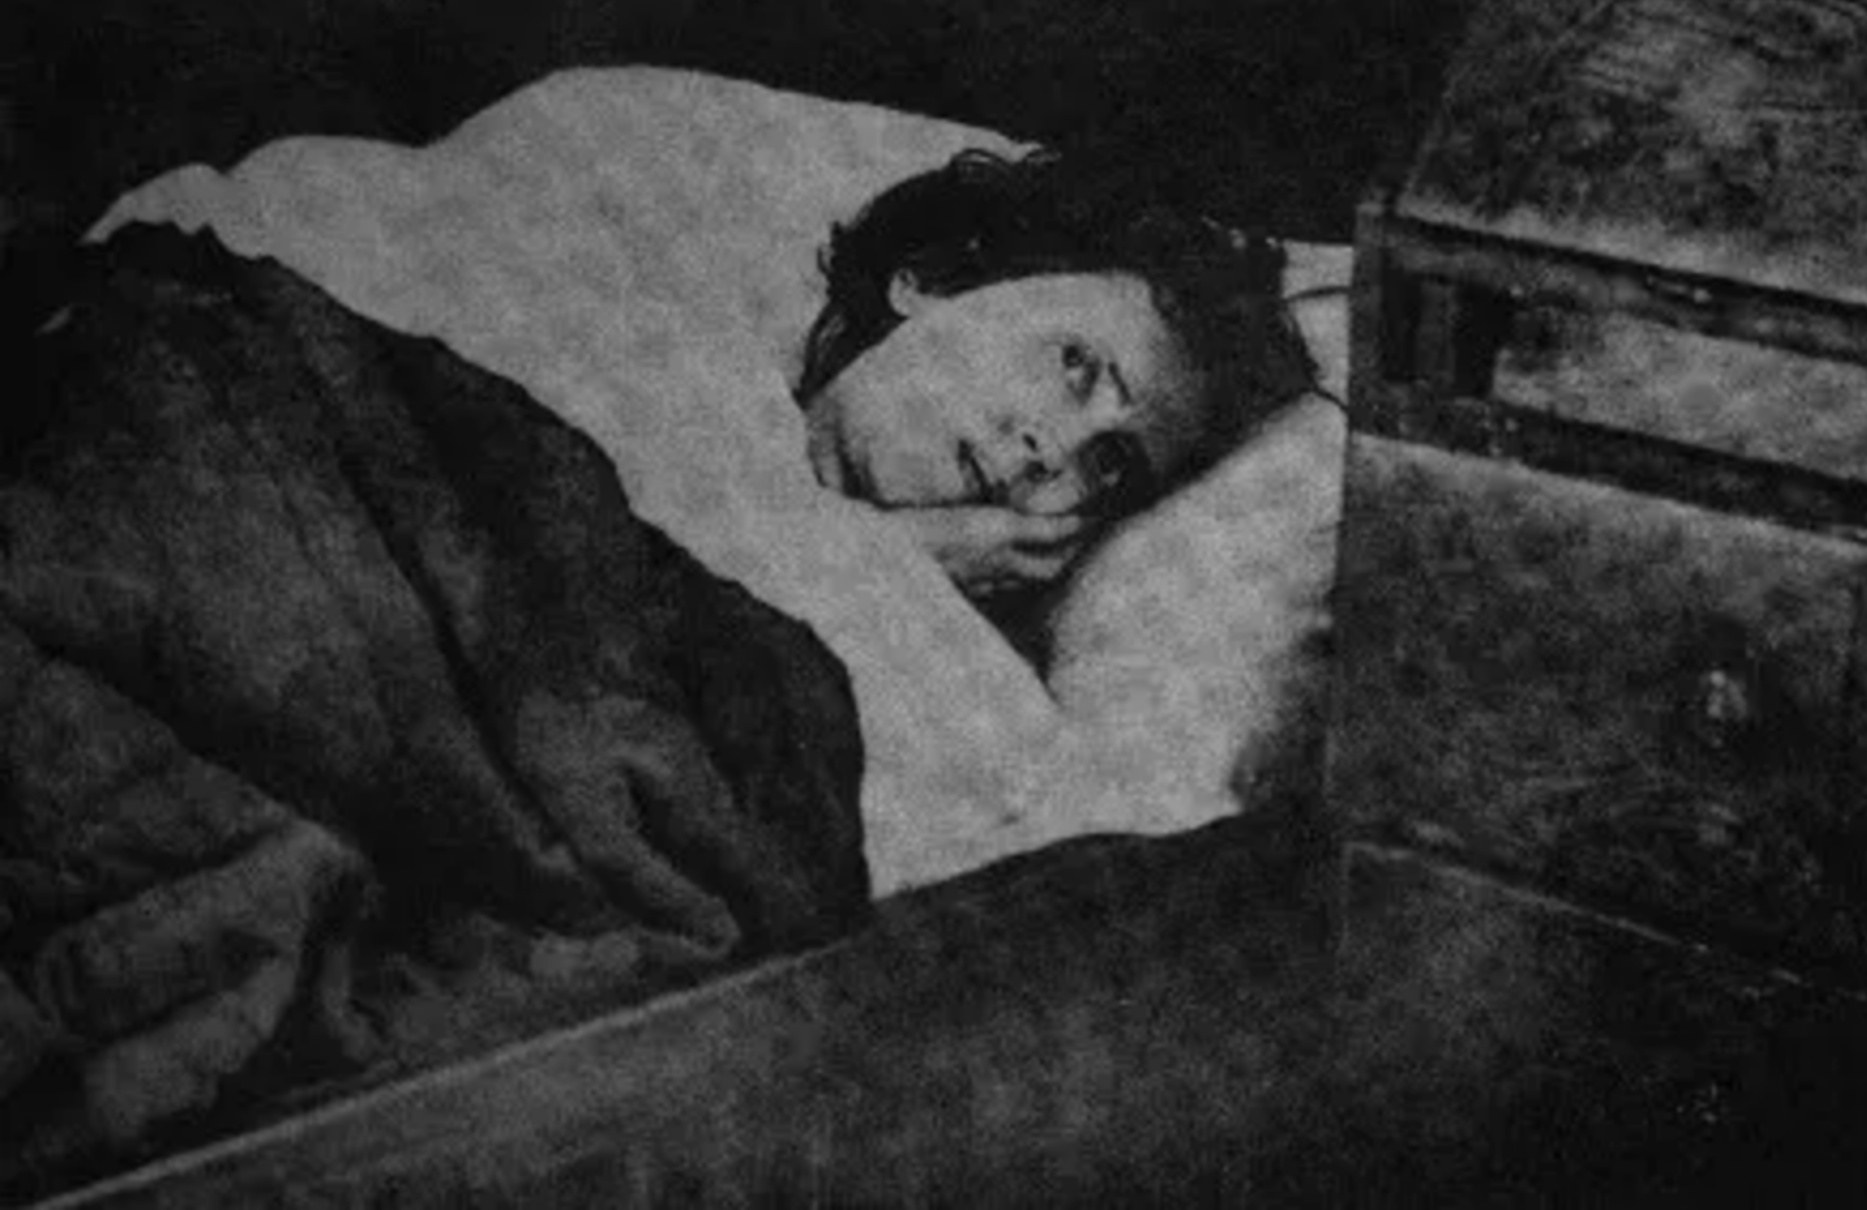 Karolina Olsson (29 October 1861 – 5 April 1950), also known as "Soverskan på Oknö" ("The Sleeper of Oknö"), was a Swedish woman who purportedly remained in hibernation between 1876 and 1908 (32 years). This is believed to be the longest time that anyone has lived in this manner who then awoke without any residual symptoms.